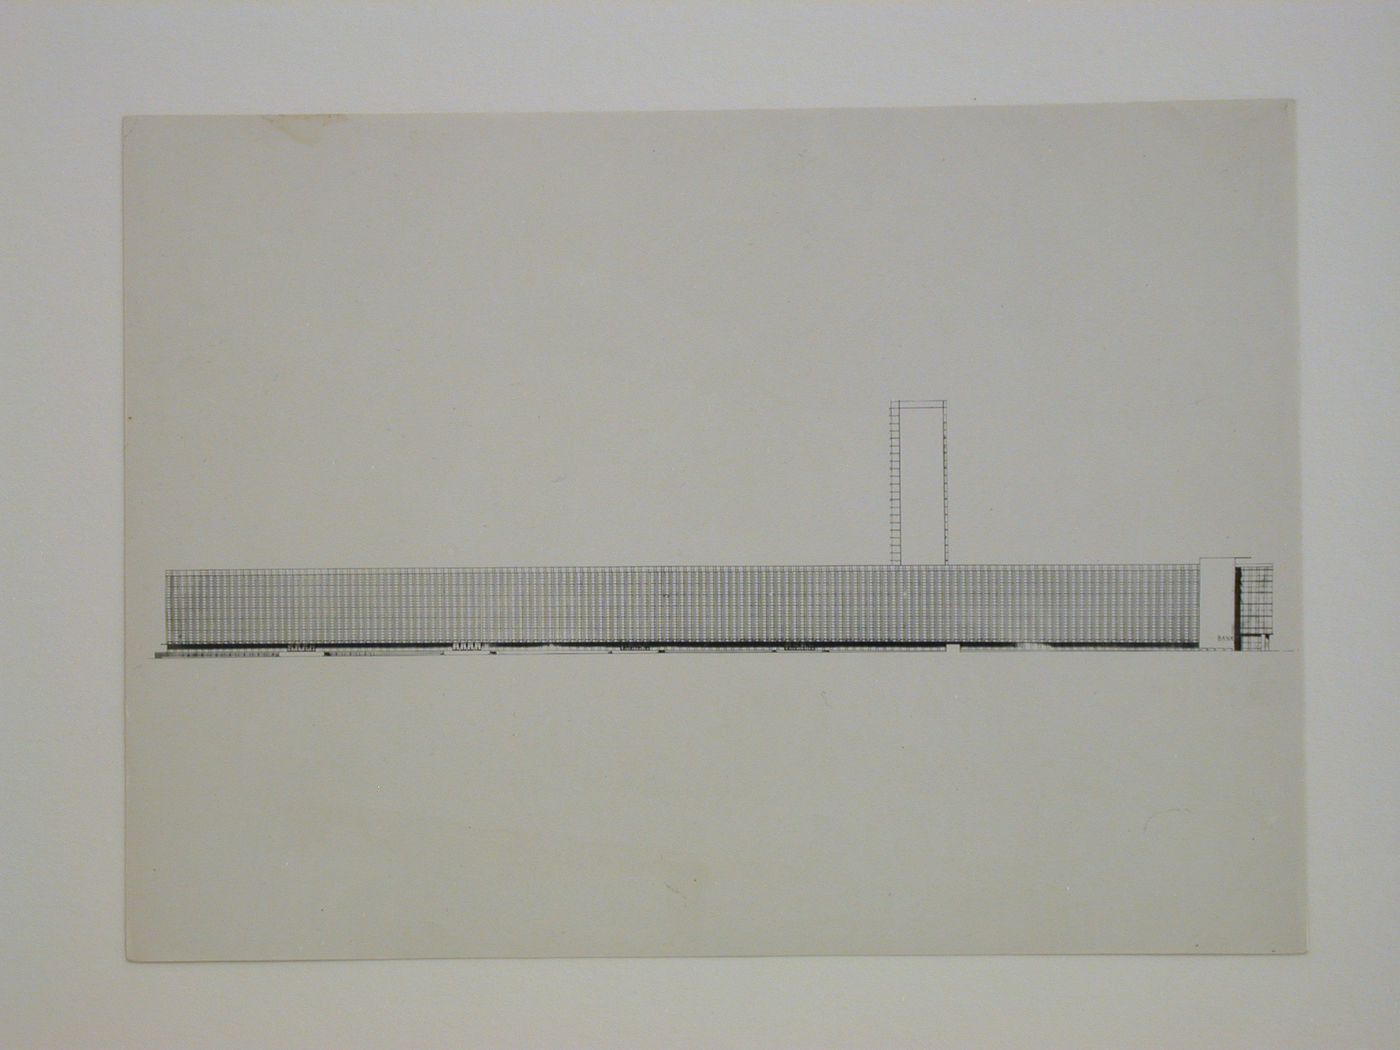 Photograph of an elevation for the Building of Industry, Sverdlovsk, Soviet Union (now Ekaterinburg, Russia)